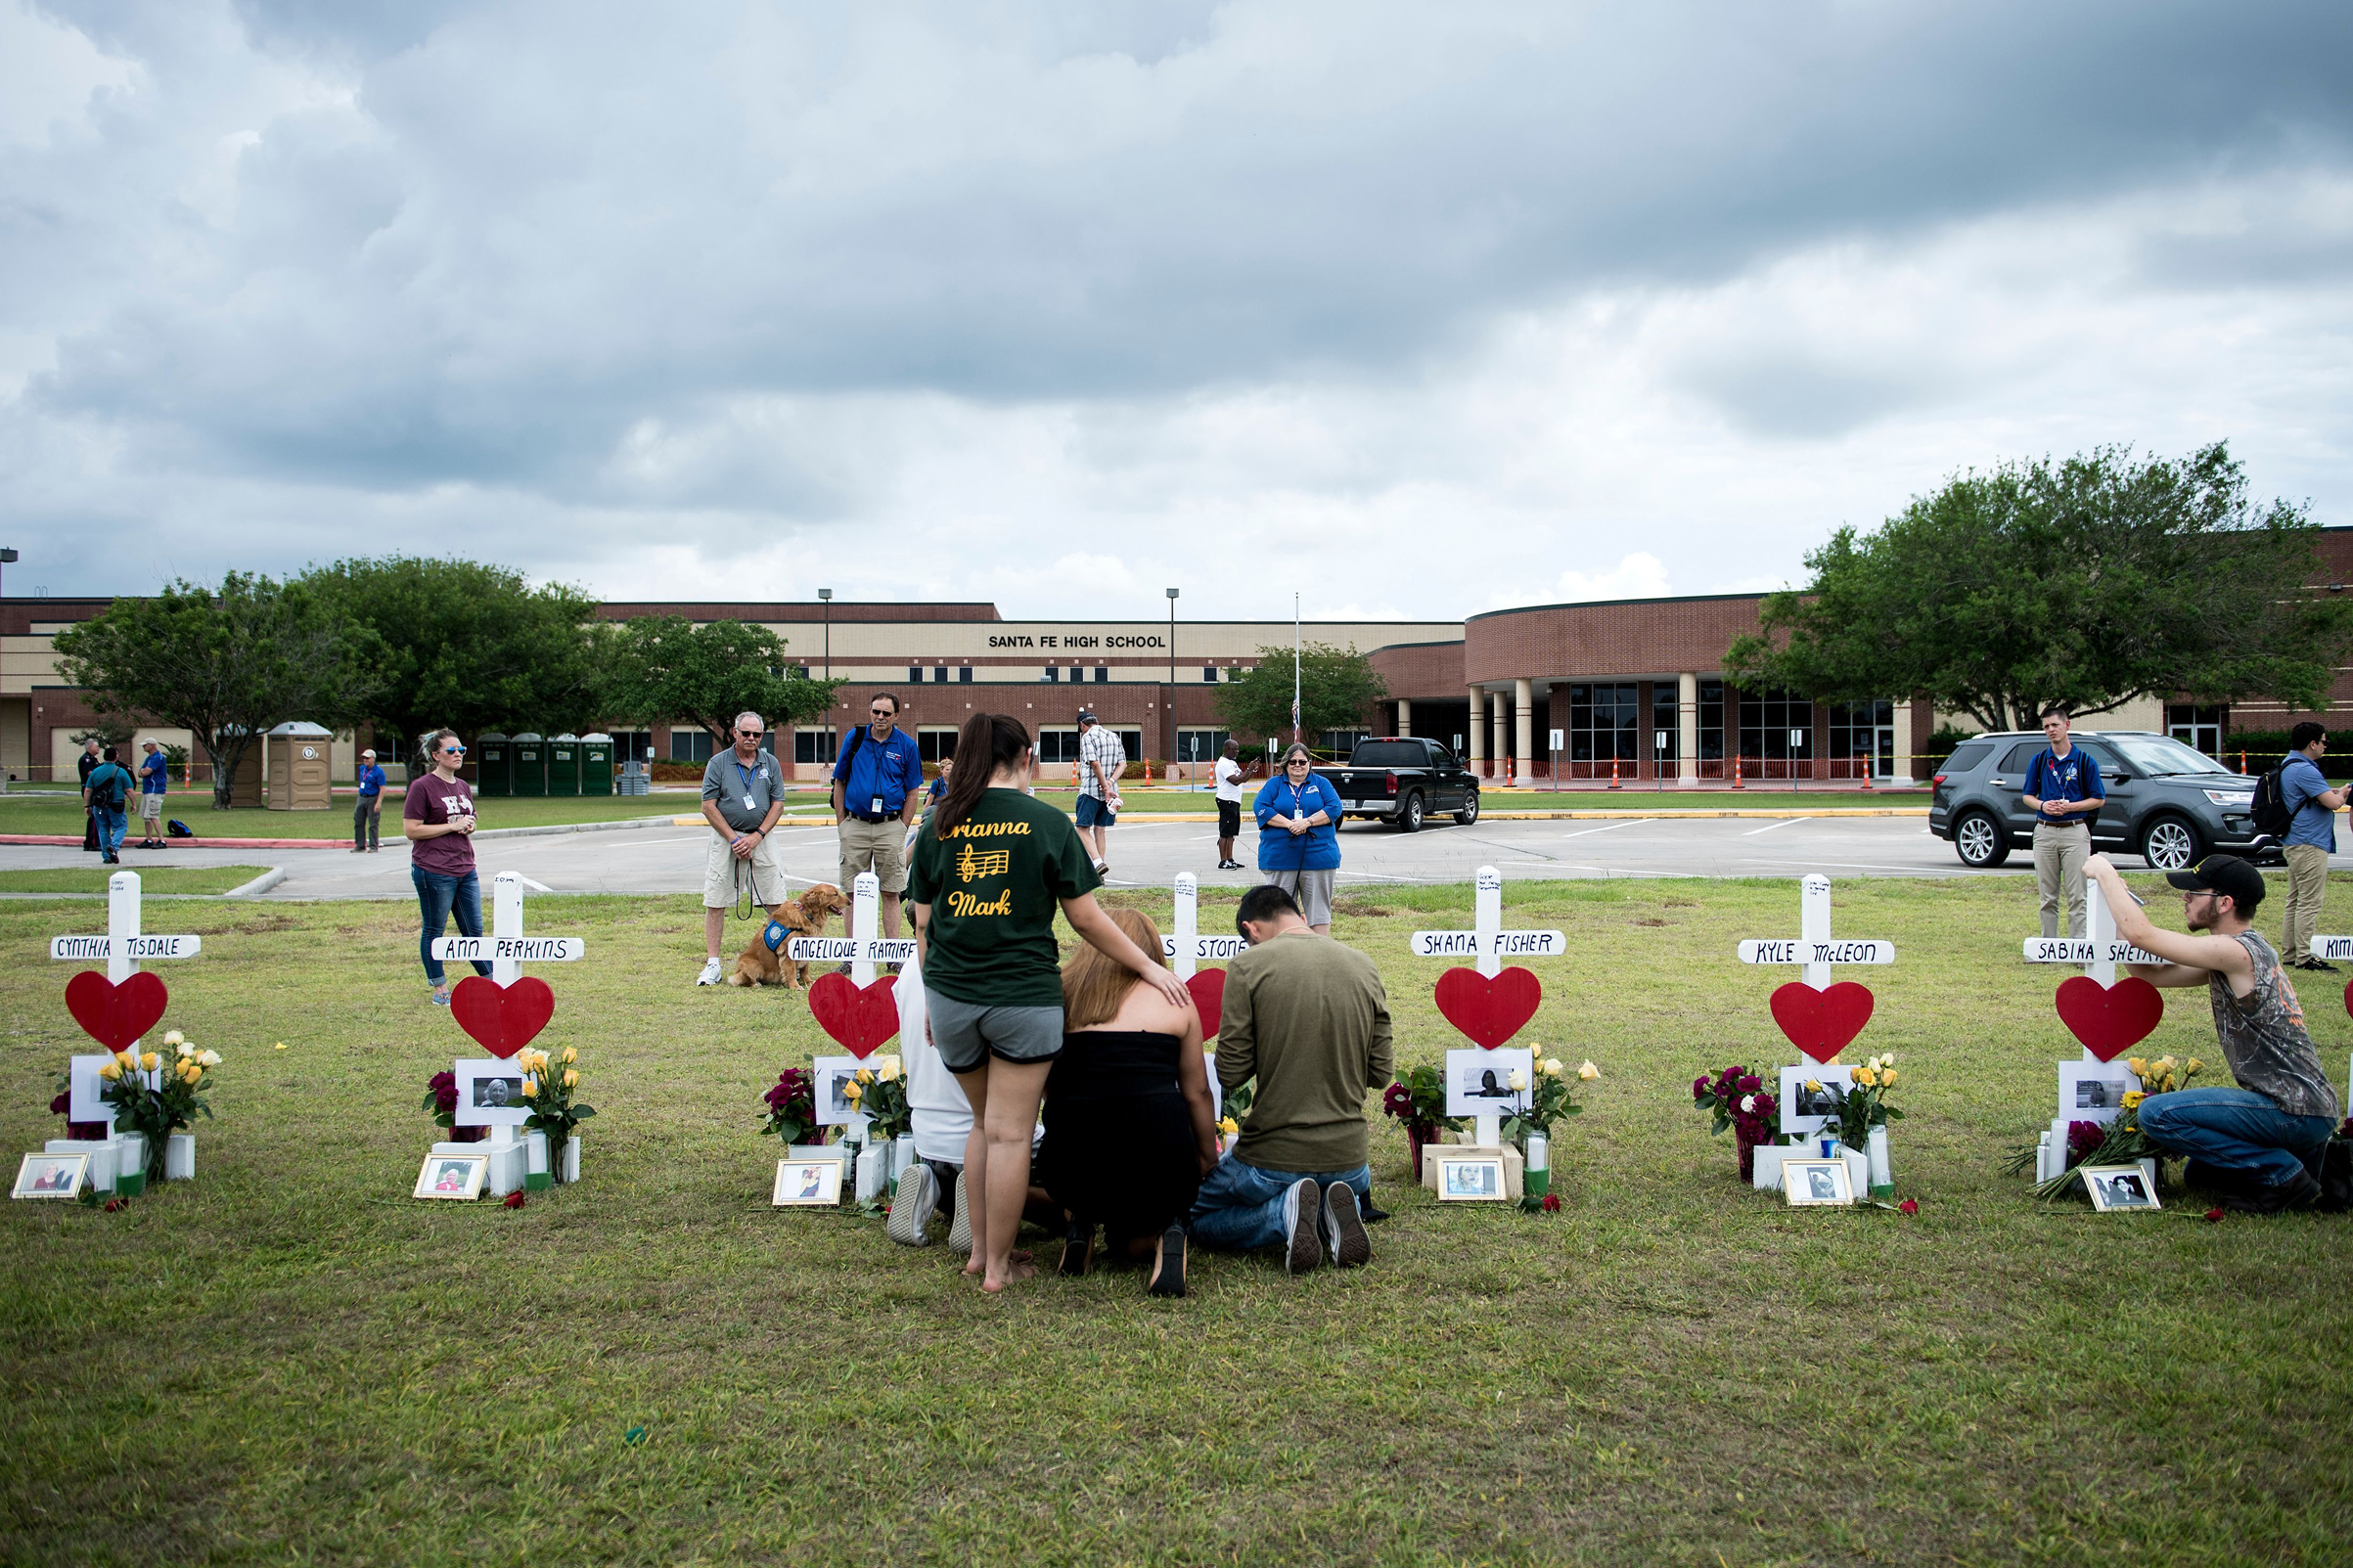 People visit a cross for Christopher Stone at a memorial for the victims of the Santa Fe High School shooting on May 21, 2018 in Santa Fe, Texas. (Brendan Smialowski—AFP/Getty Images)